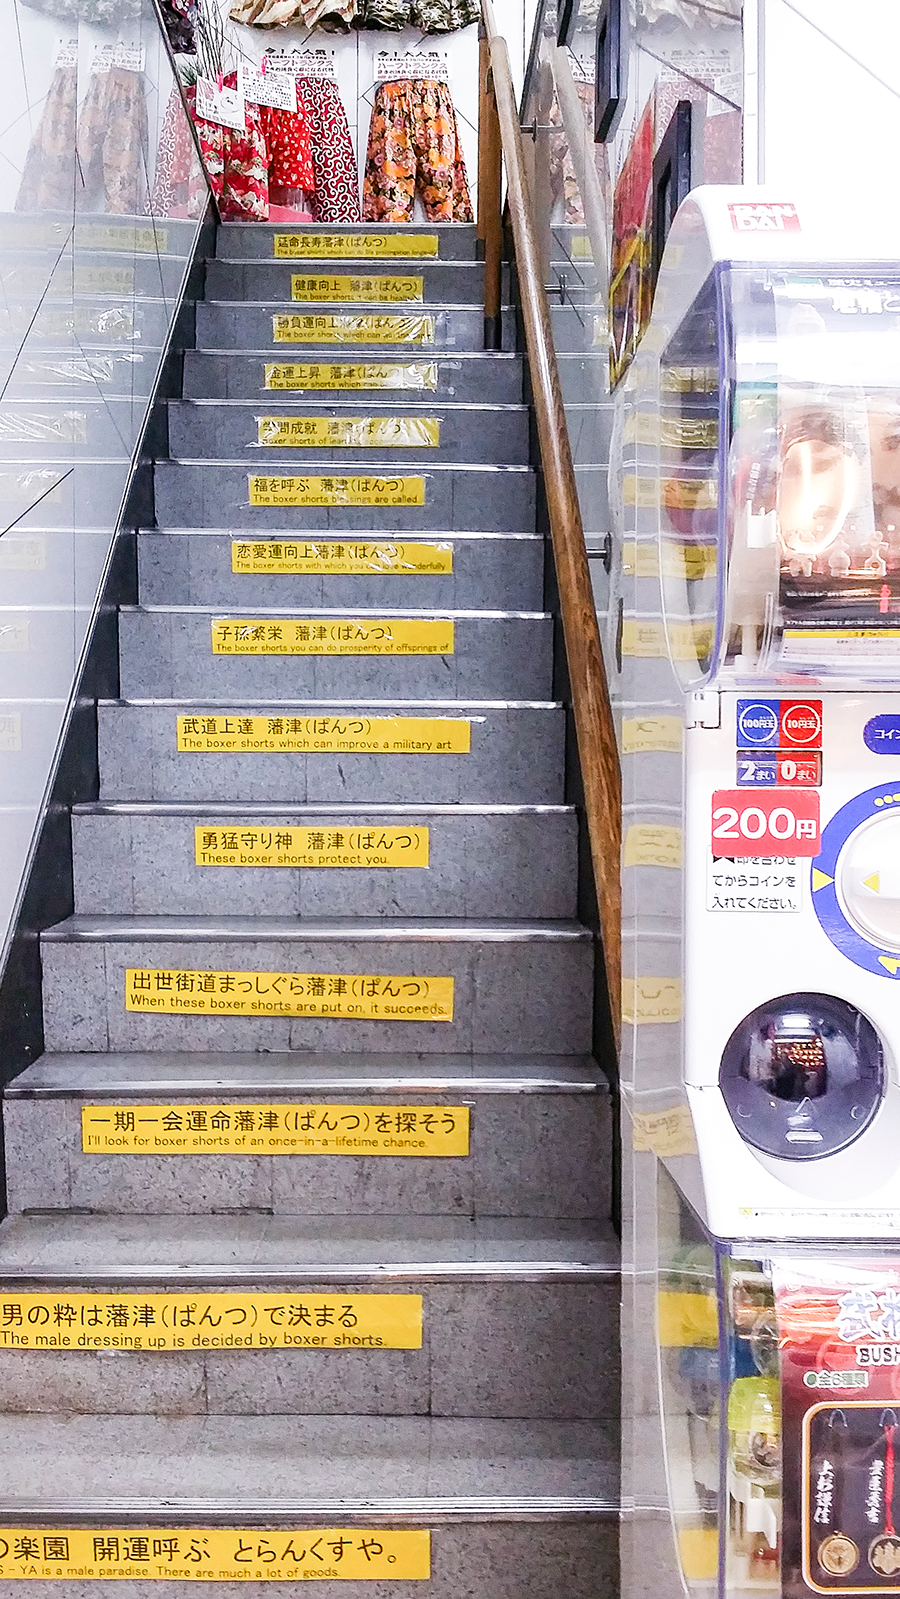 Stairs with interesting words leading up to Trunks-ya in Tokyo, Japan.